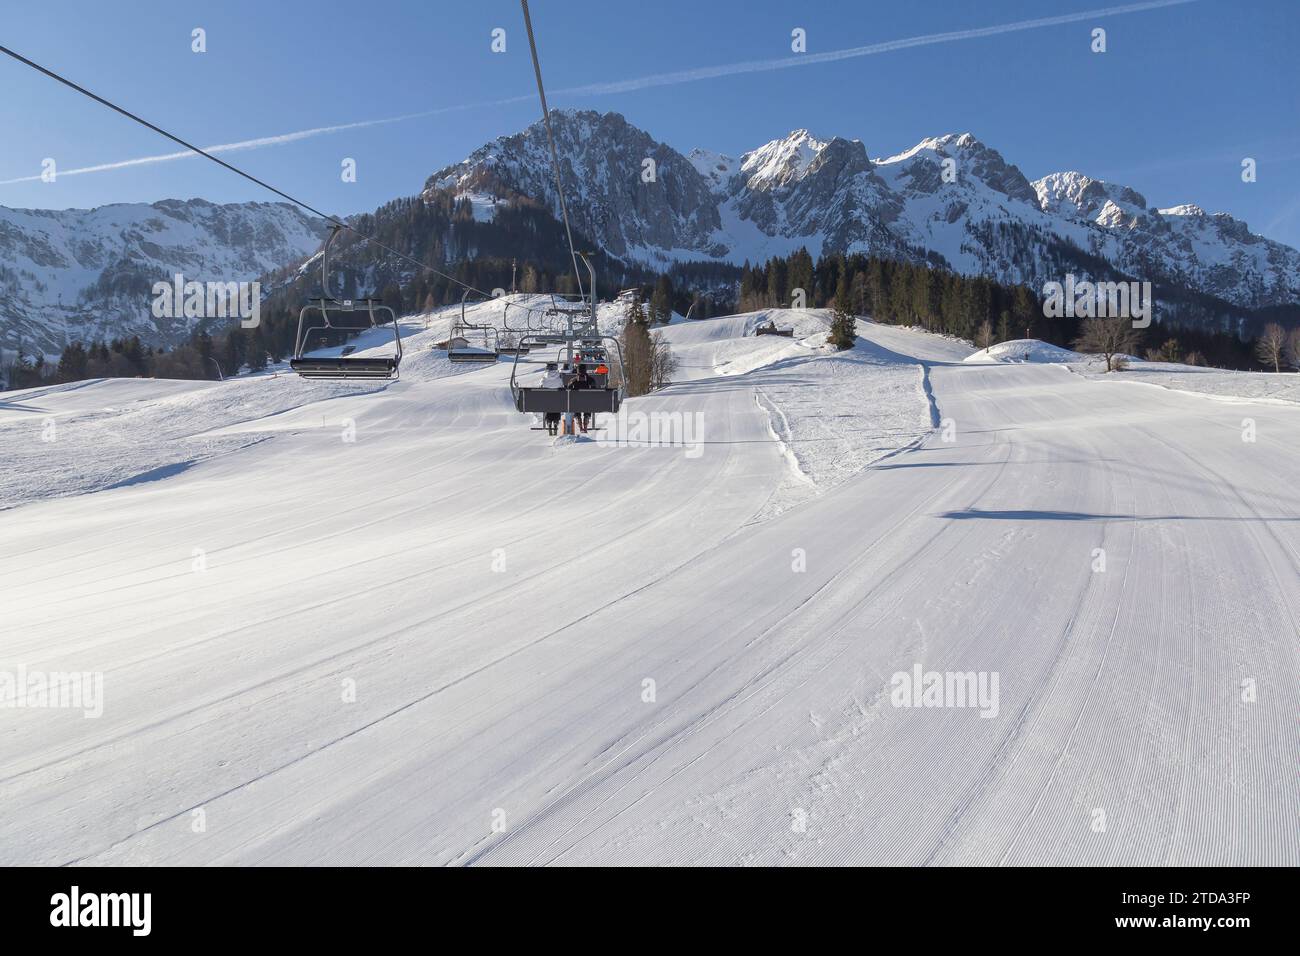 Chairlift and well-prepared ski run at a ski resort in the snowy mountains. Austria Stock Photo